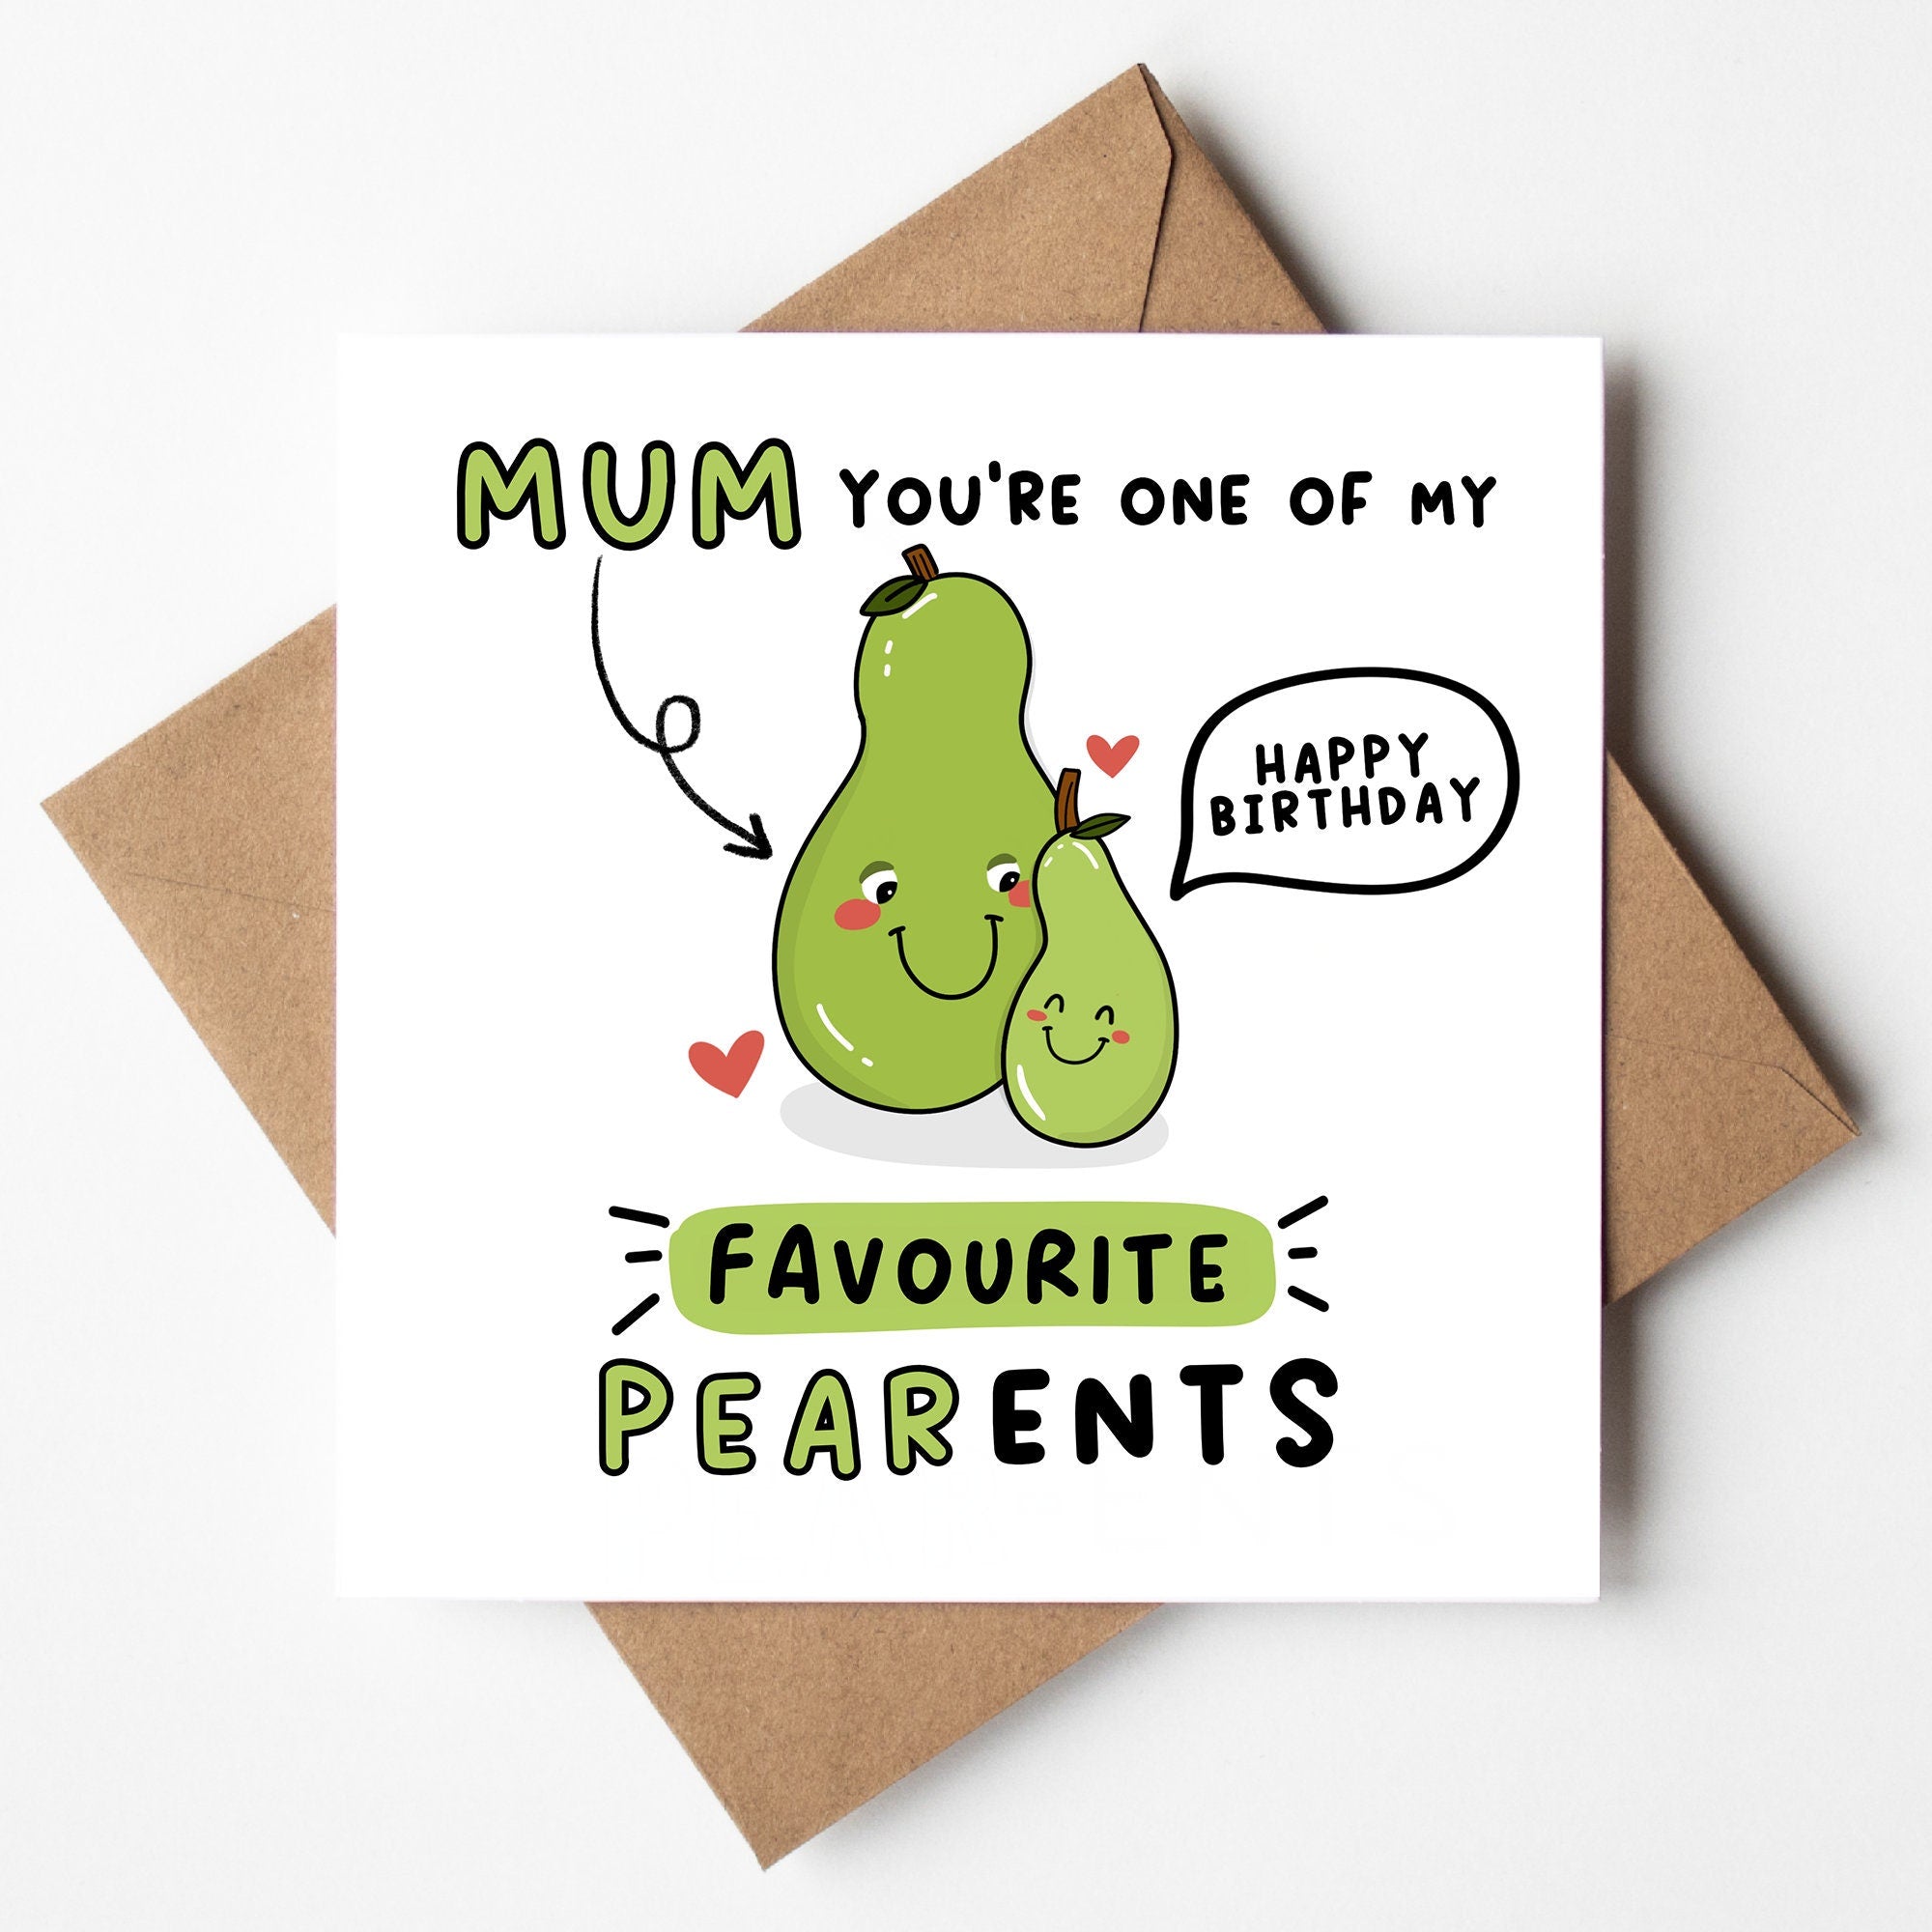 Mum You're one of my favourite pear-ants, best mum ever, from daughter, from son, funny birthday card